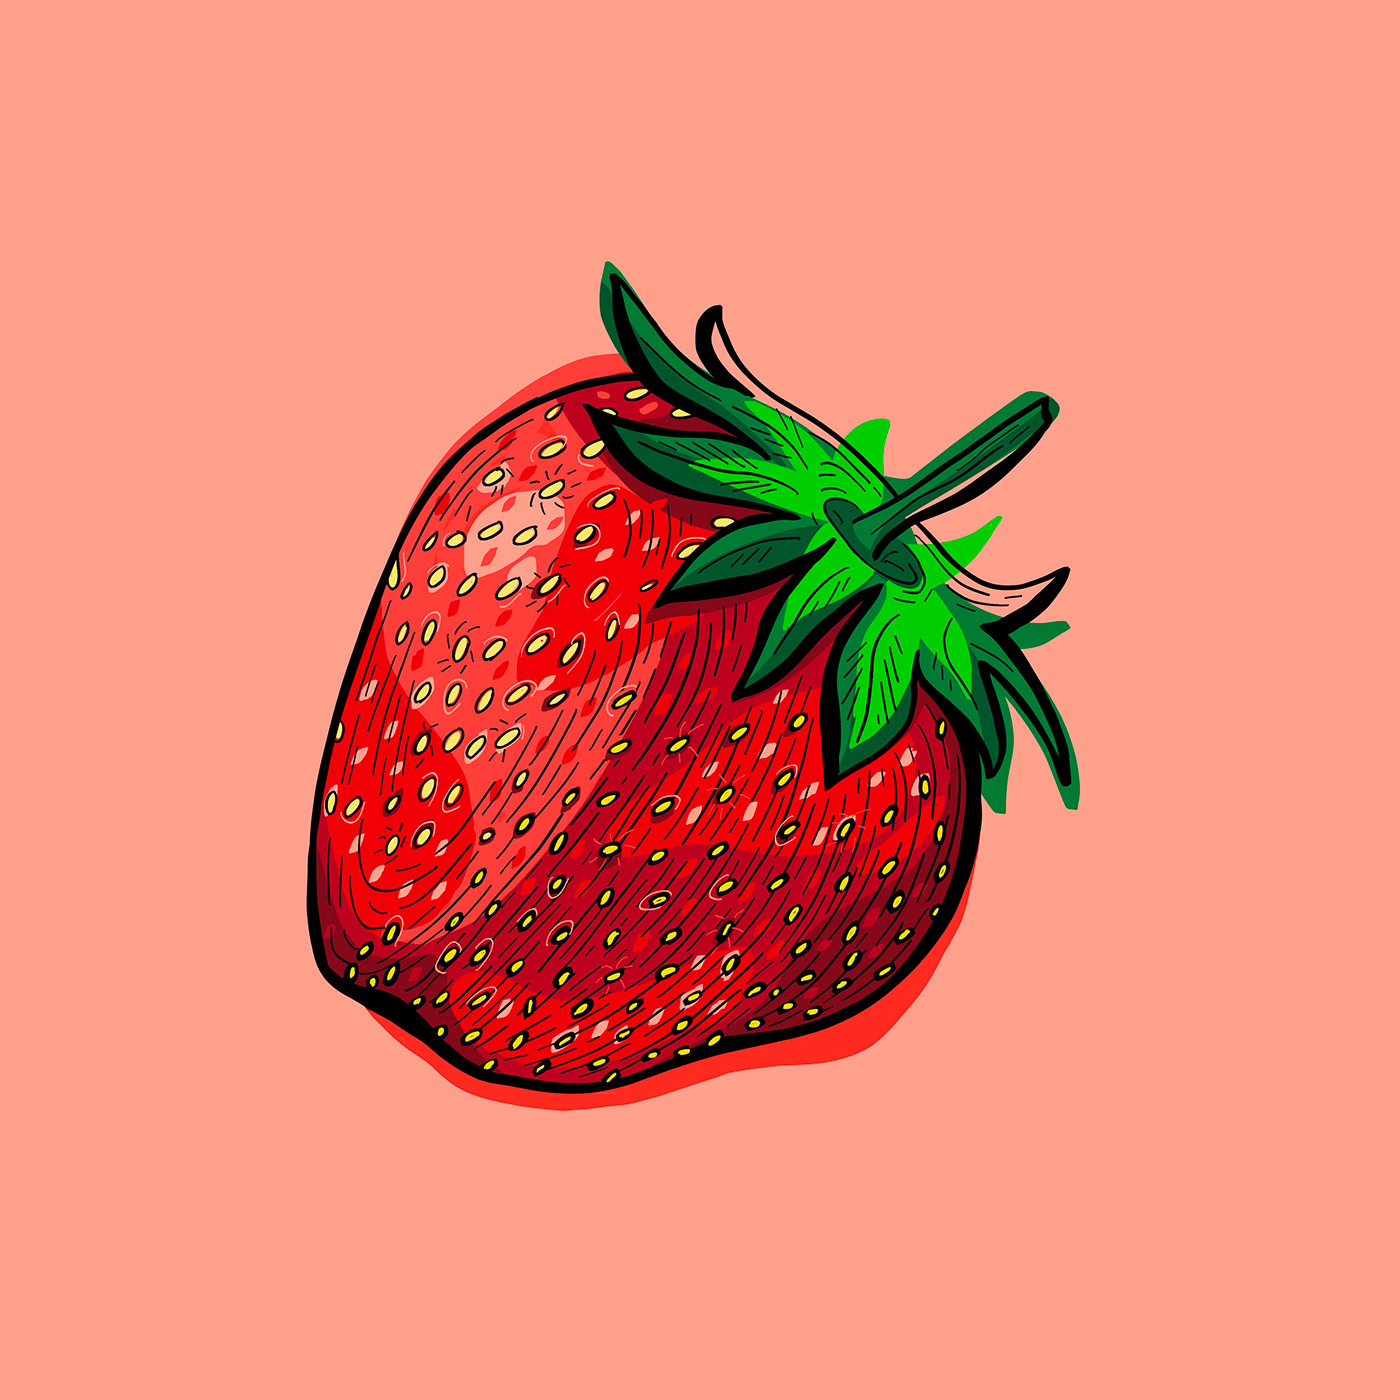 Colorful illustration of a strawberry 